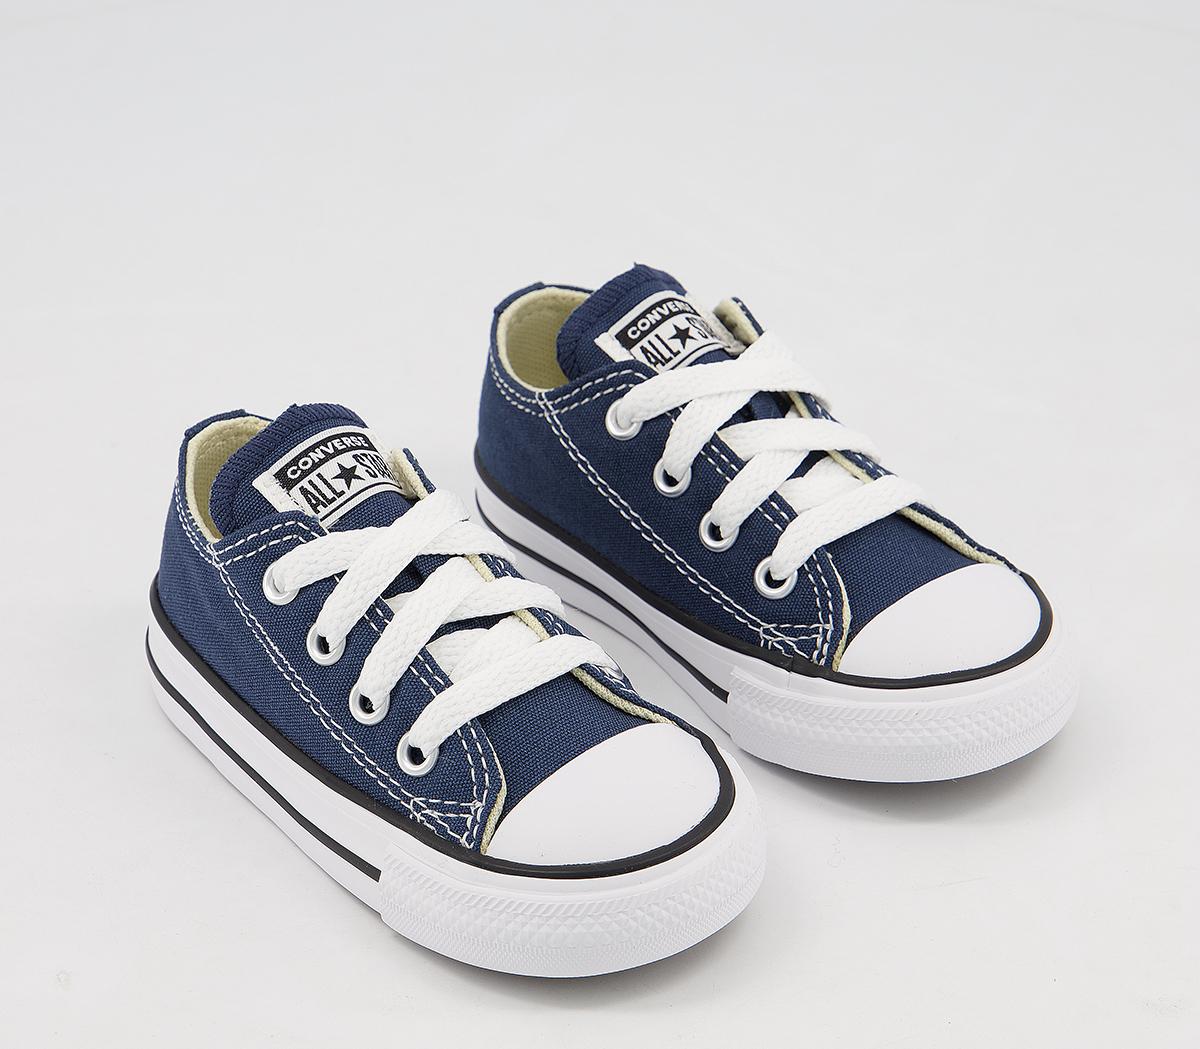 Kids Converse Baby Boys All Star Low Shoes In Navy Blue And White, 7 Infant